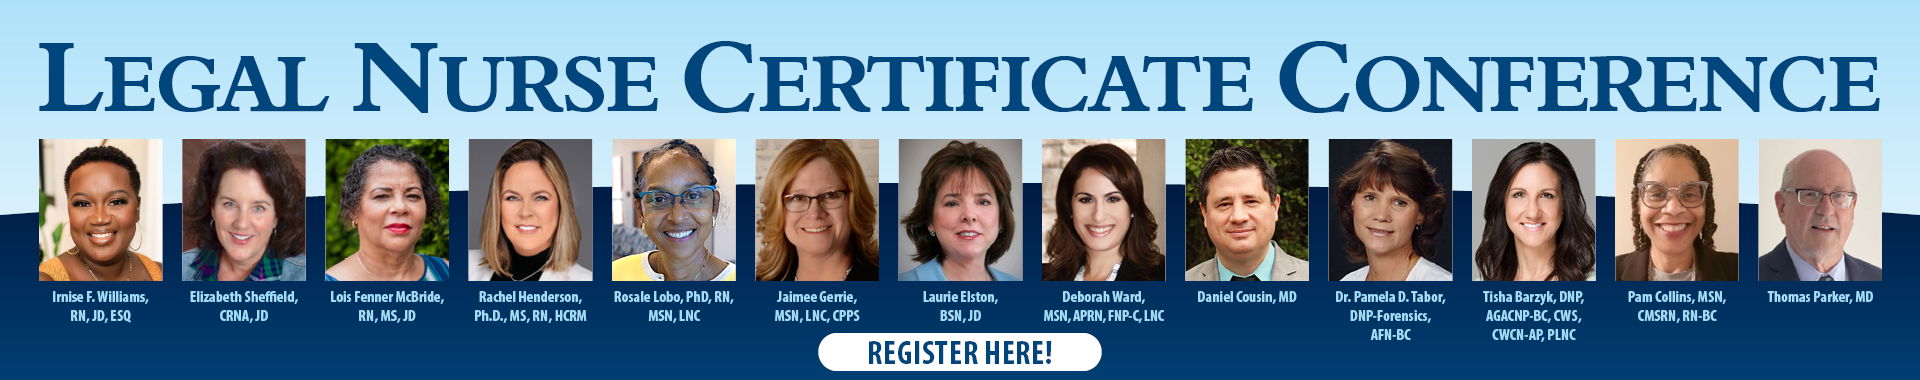 2023 Legal Nurse Certificate Conference: Short Staffing, Documentation, Chart Reviews, Board Complaints, How to Become a LNC & More!